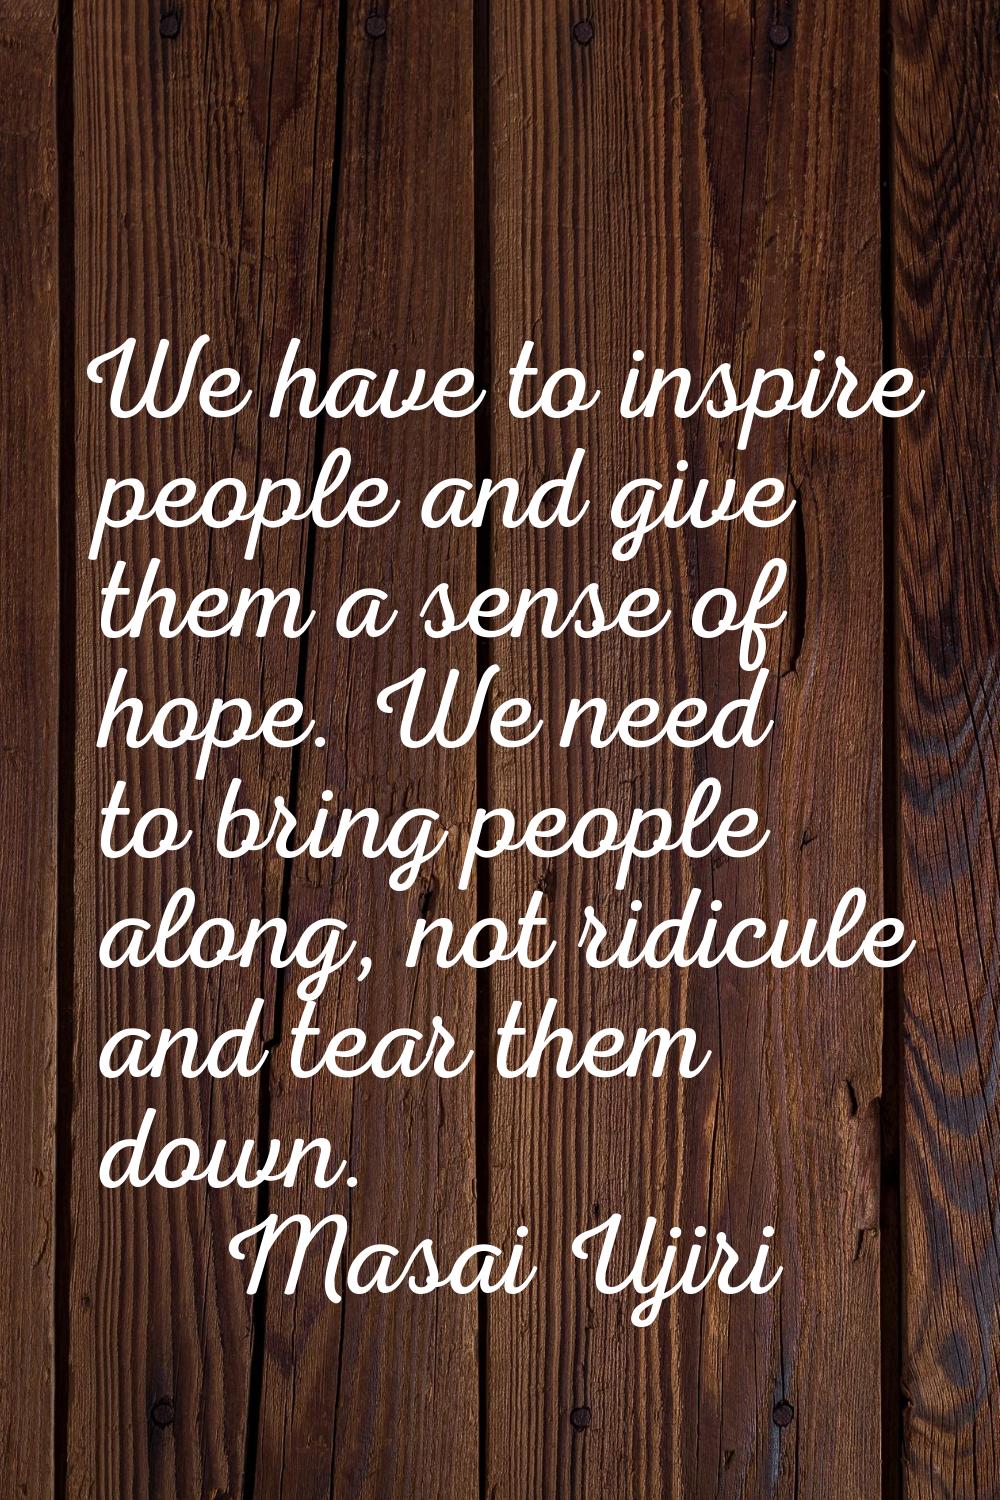 We have to inspire people and give them a sense of hope. We need to bring people along, not ridicul